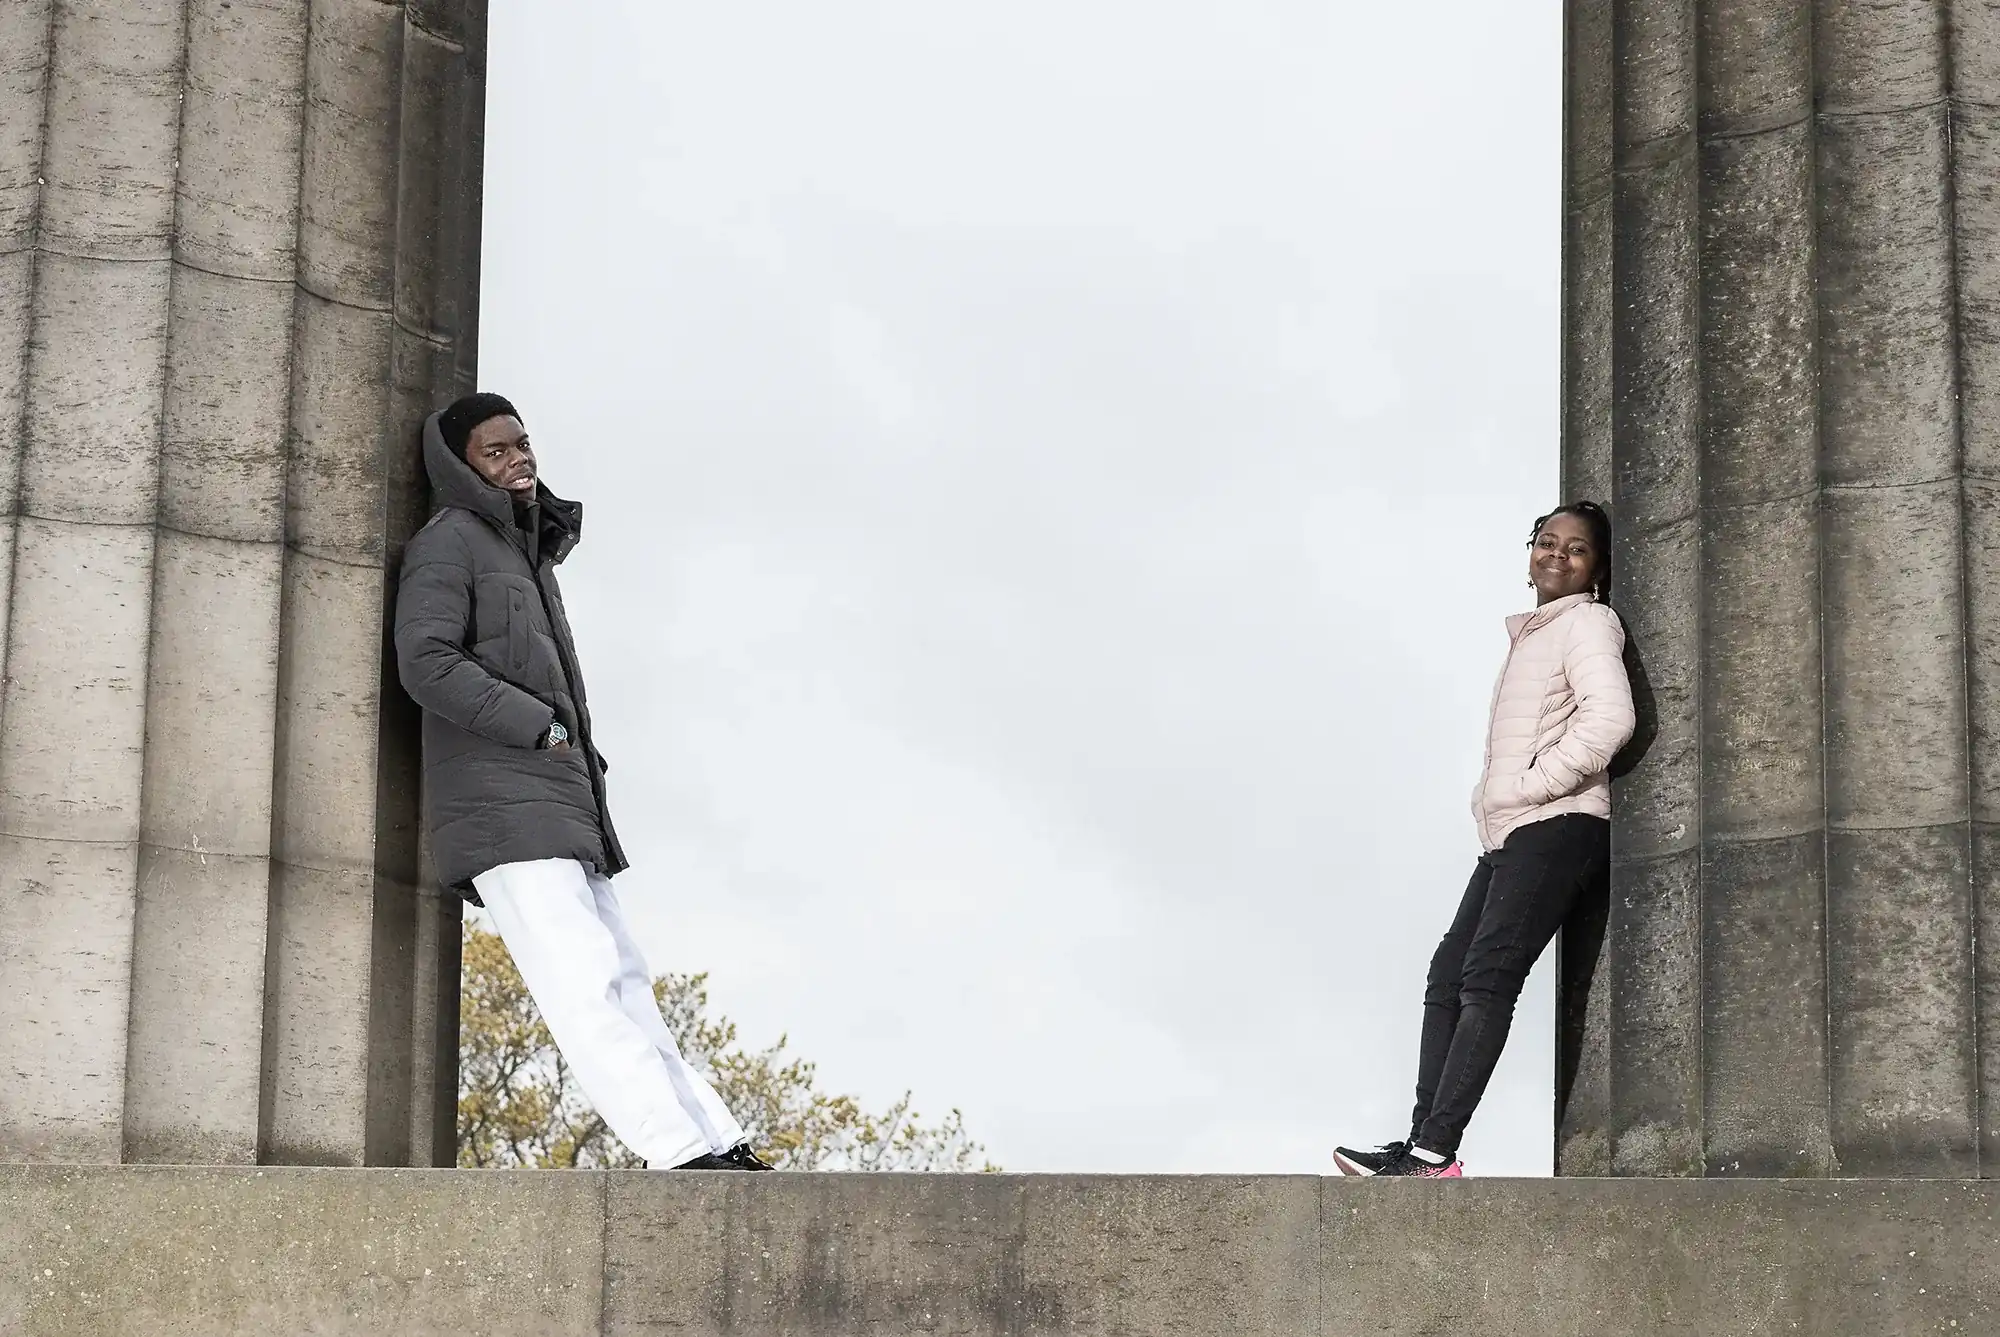 Two people stand against opposite pillars of a large stone structure. One wears a dark coat and white pants, while the other wears a light jacket and dark pants. They look towards the camera.